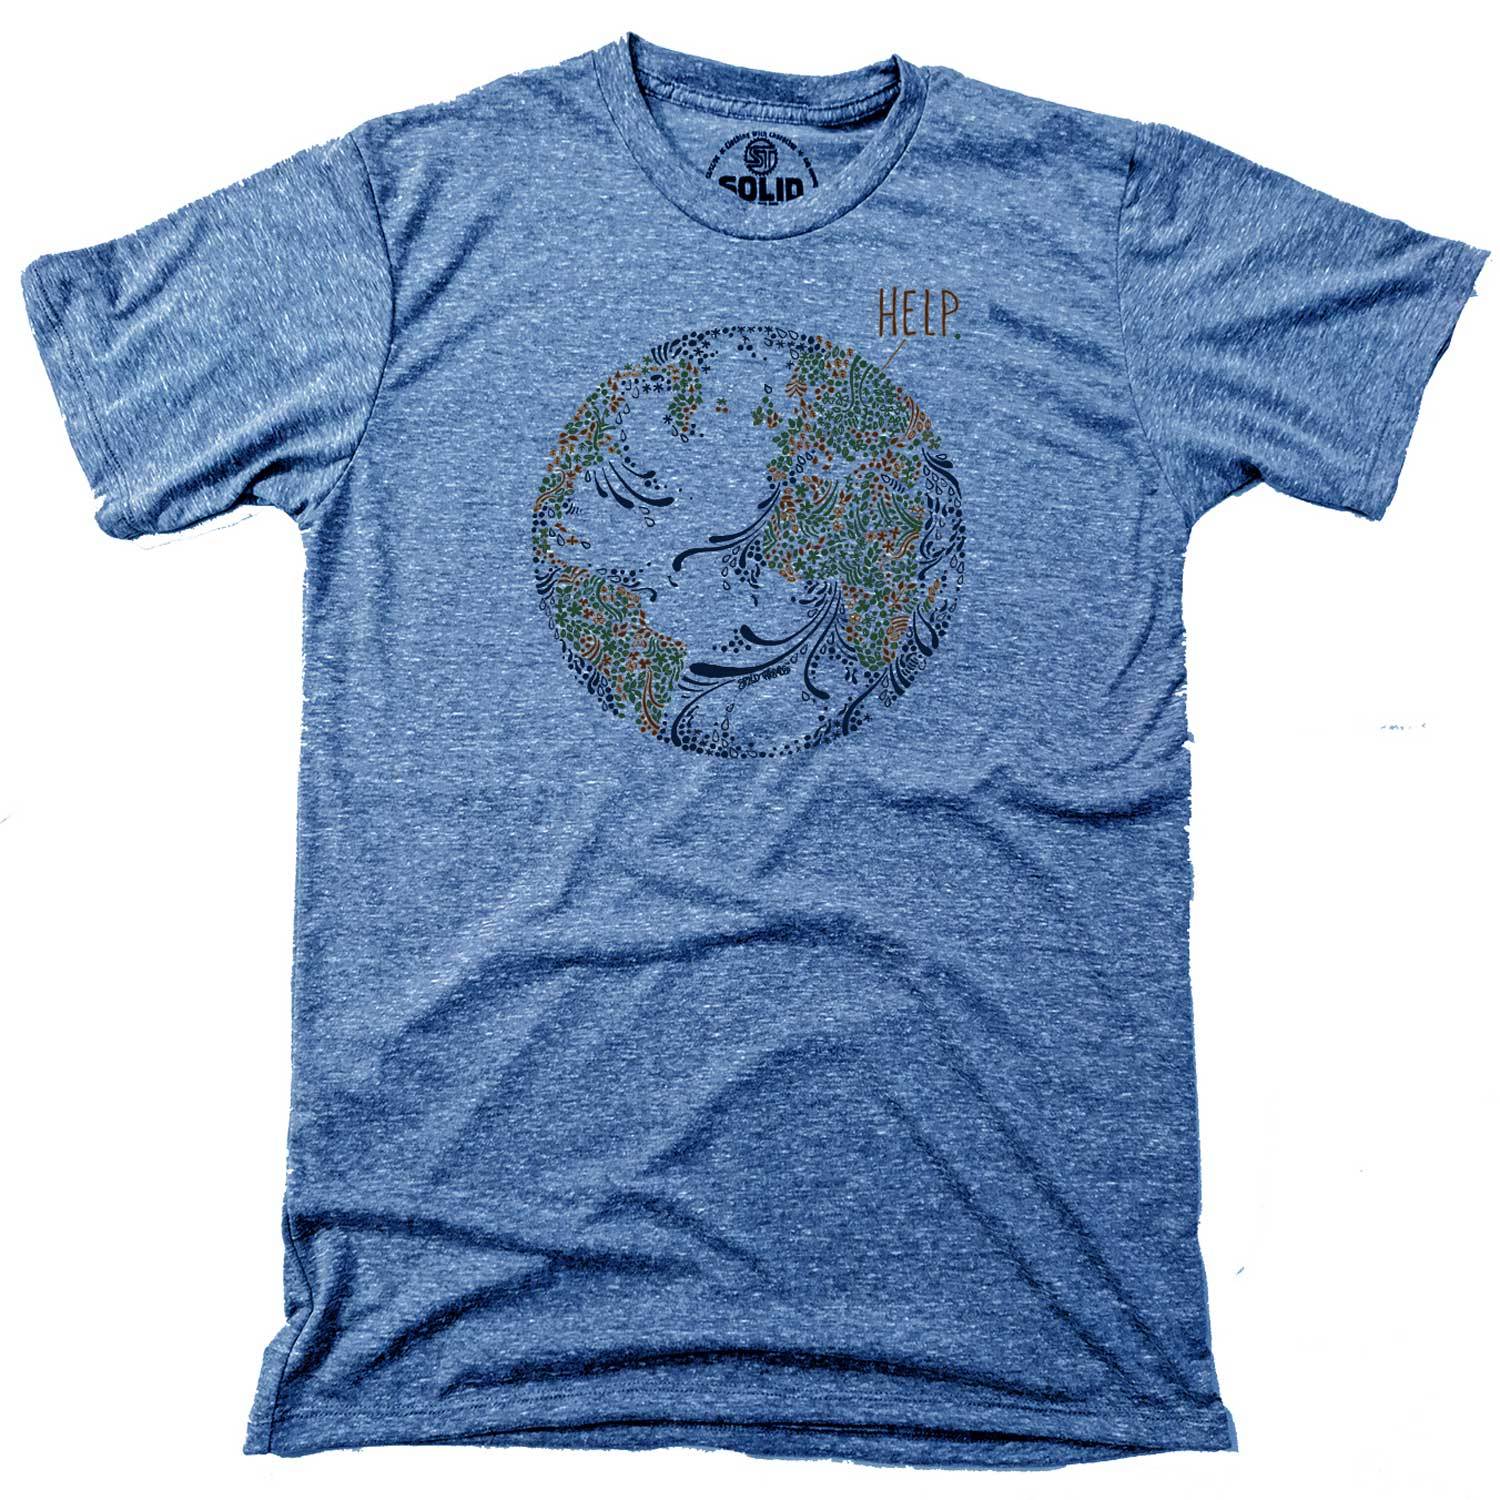 Men's Earth Help Vintage Inspired T-Shirt | Cool Environmentalism Graphic Tee | Solid Threads